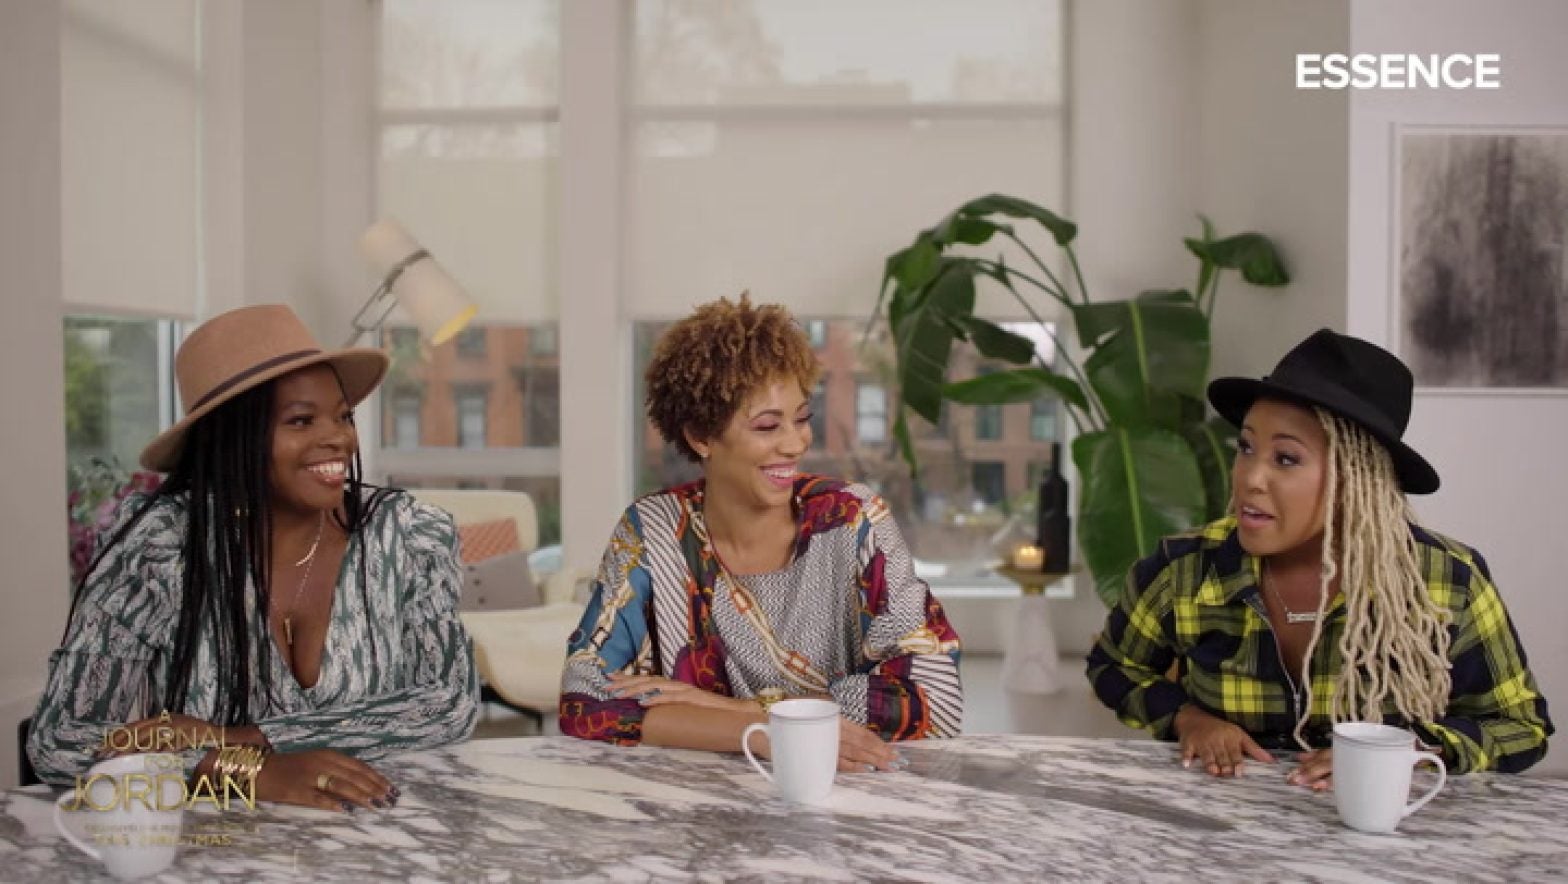 Essence Staff Discuss the Themes of Black Love and Family in A Journal For Jordan”